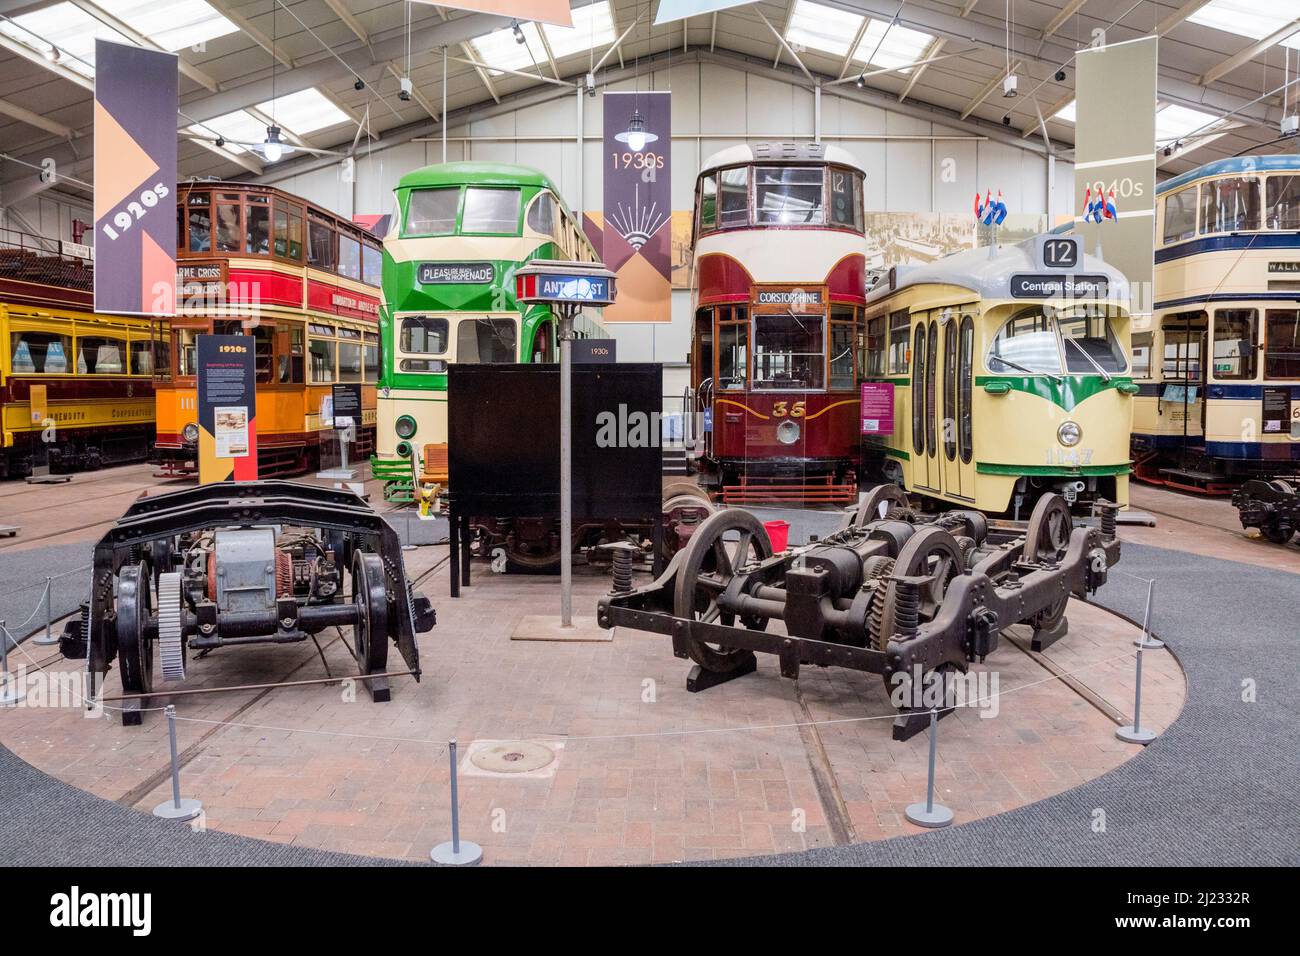 Derbyshire, UK – 5 April 2018: Beautifully restored vintage trams and part on display at Crich Tramway Village, the national tram museum Stock Photo